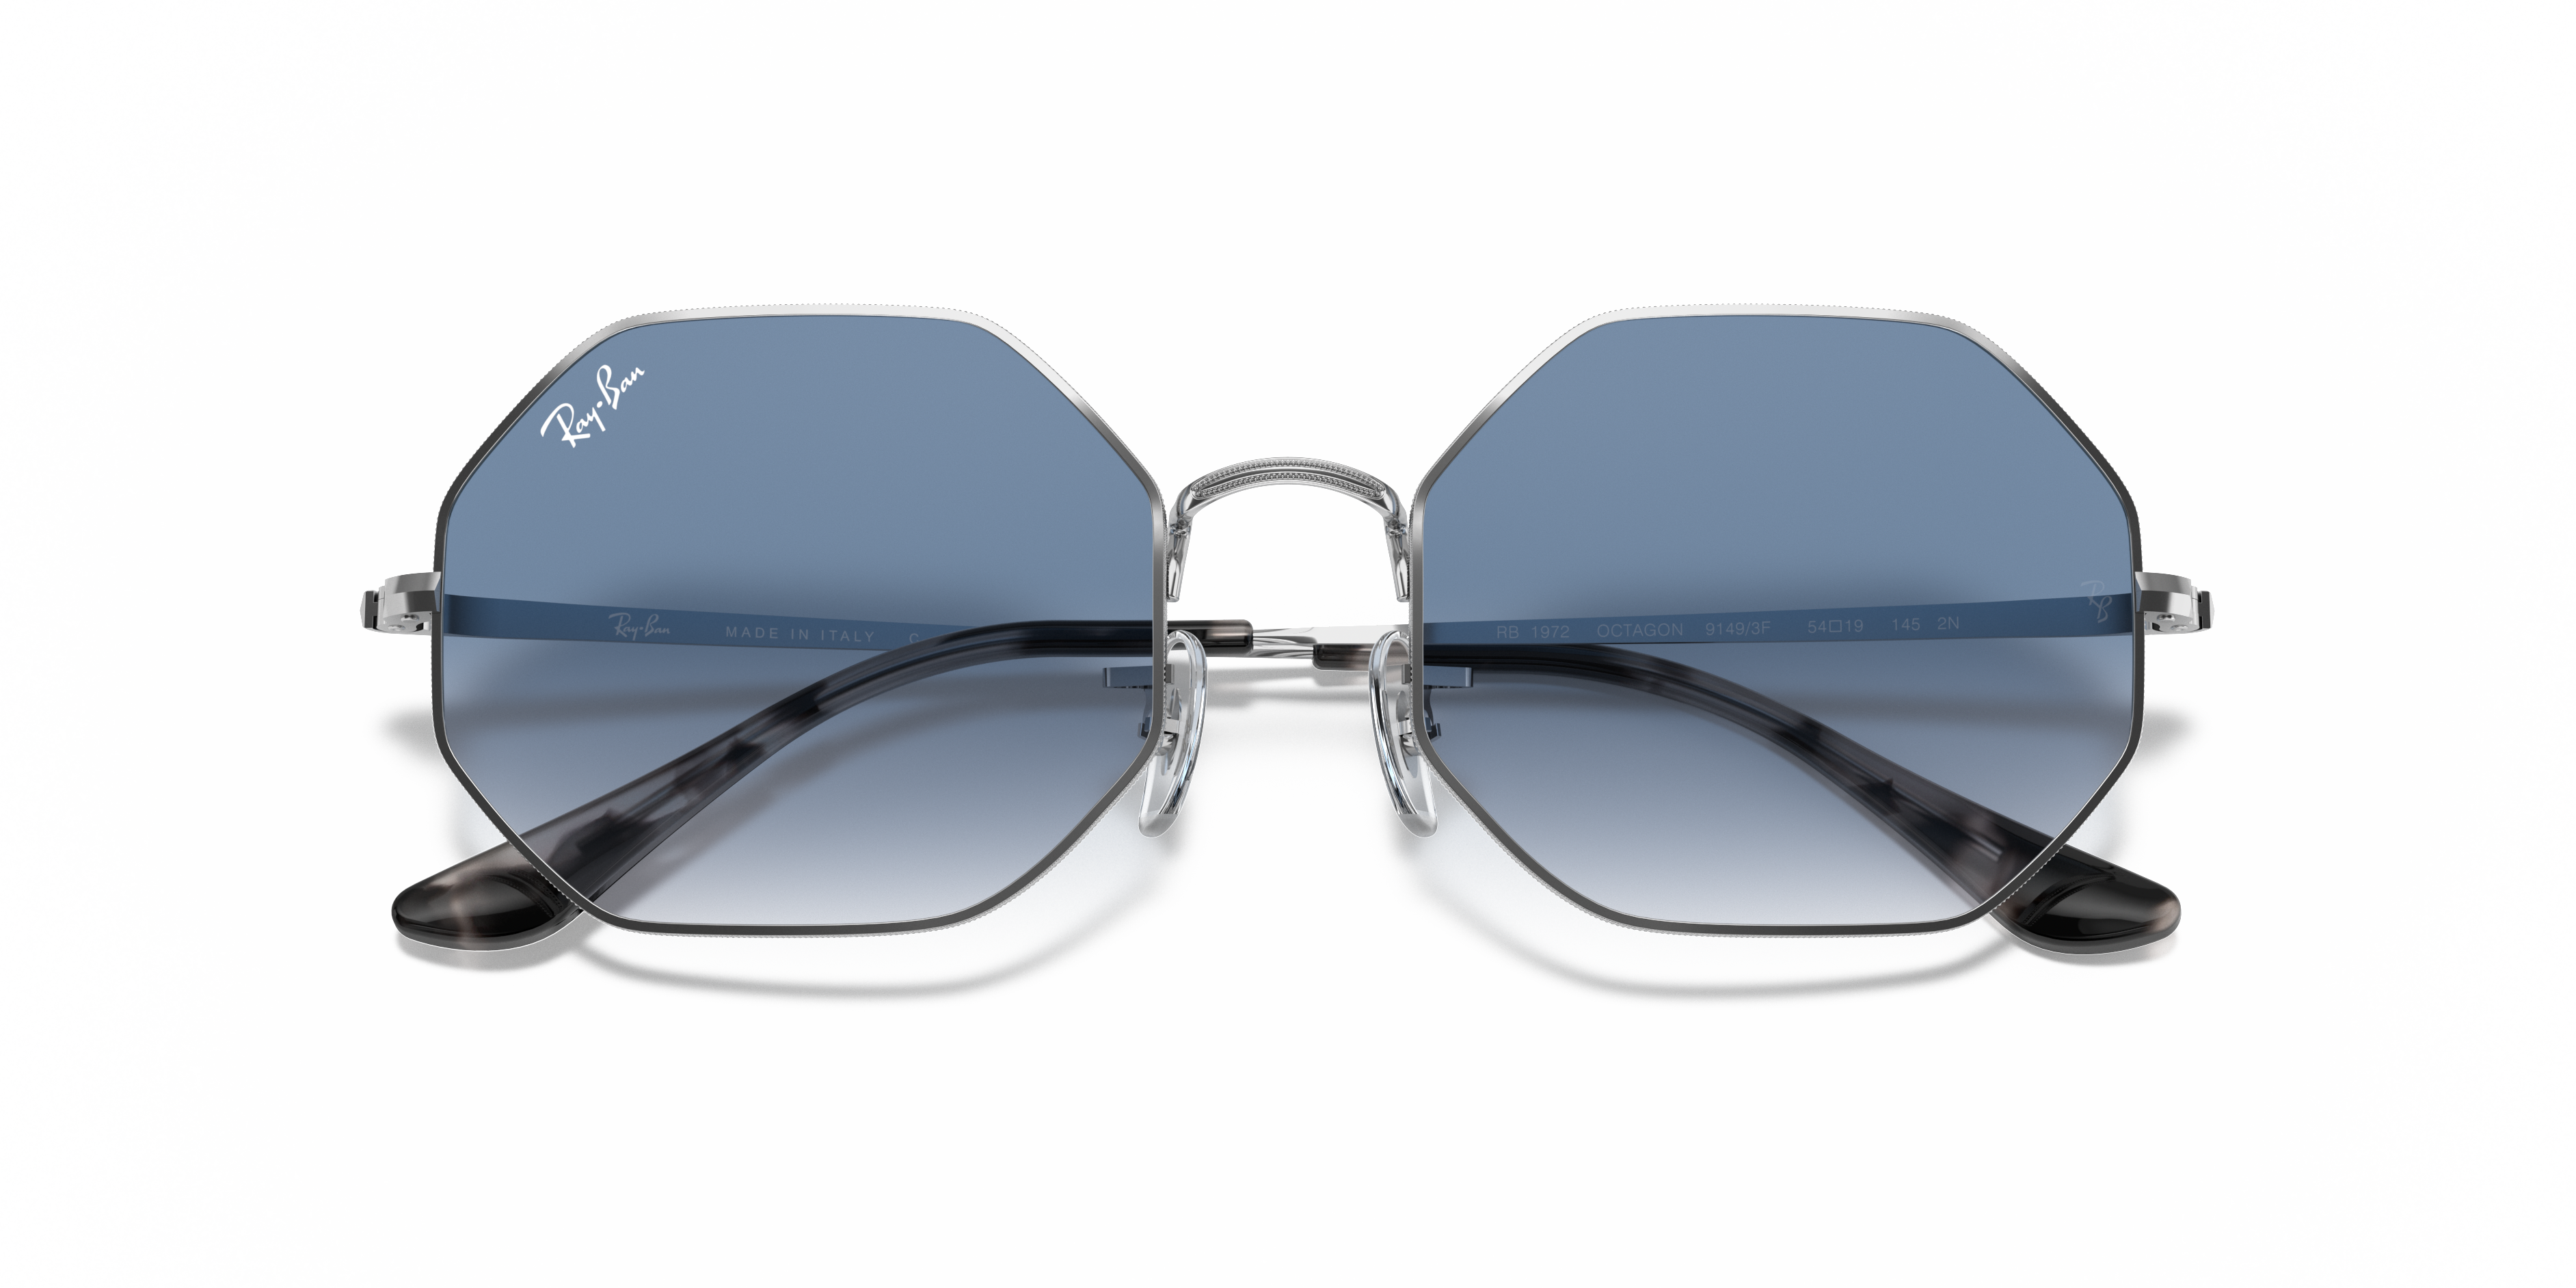 Octagon 1972 Sunglasses in Silver and Light Blue | Ray-Ban®